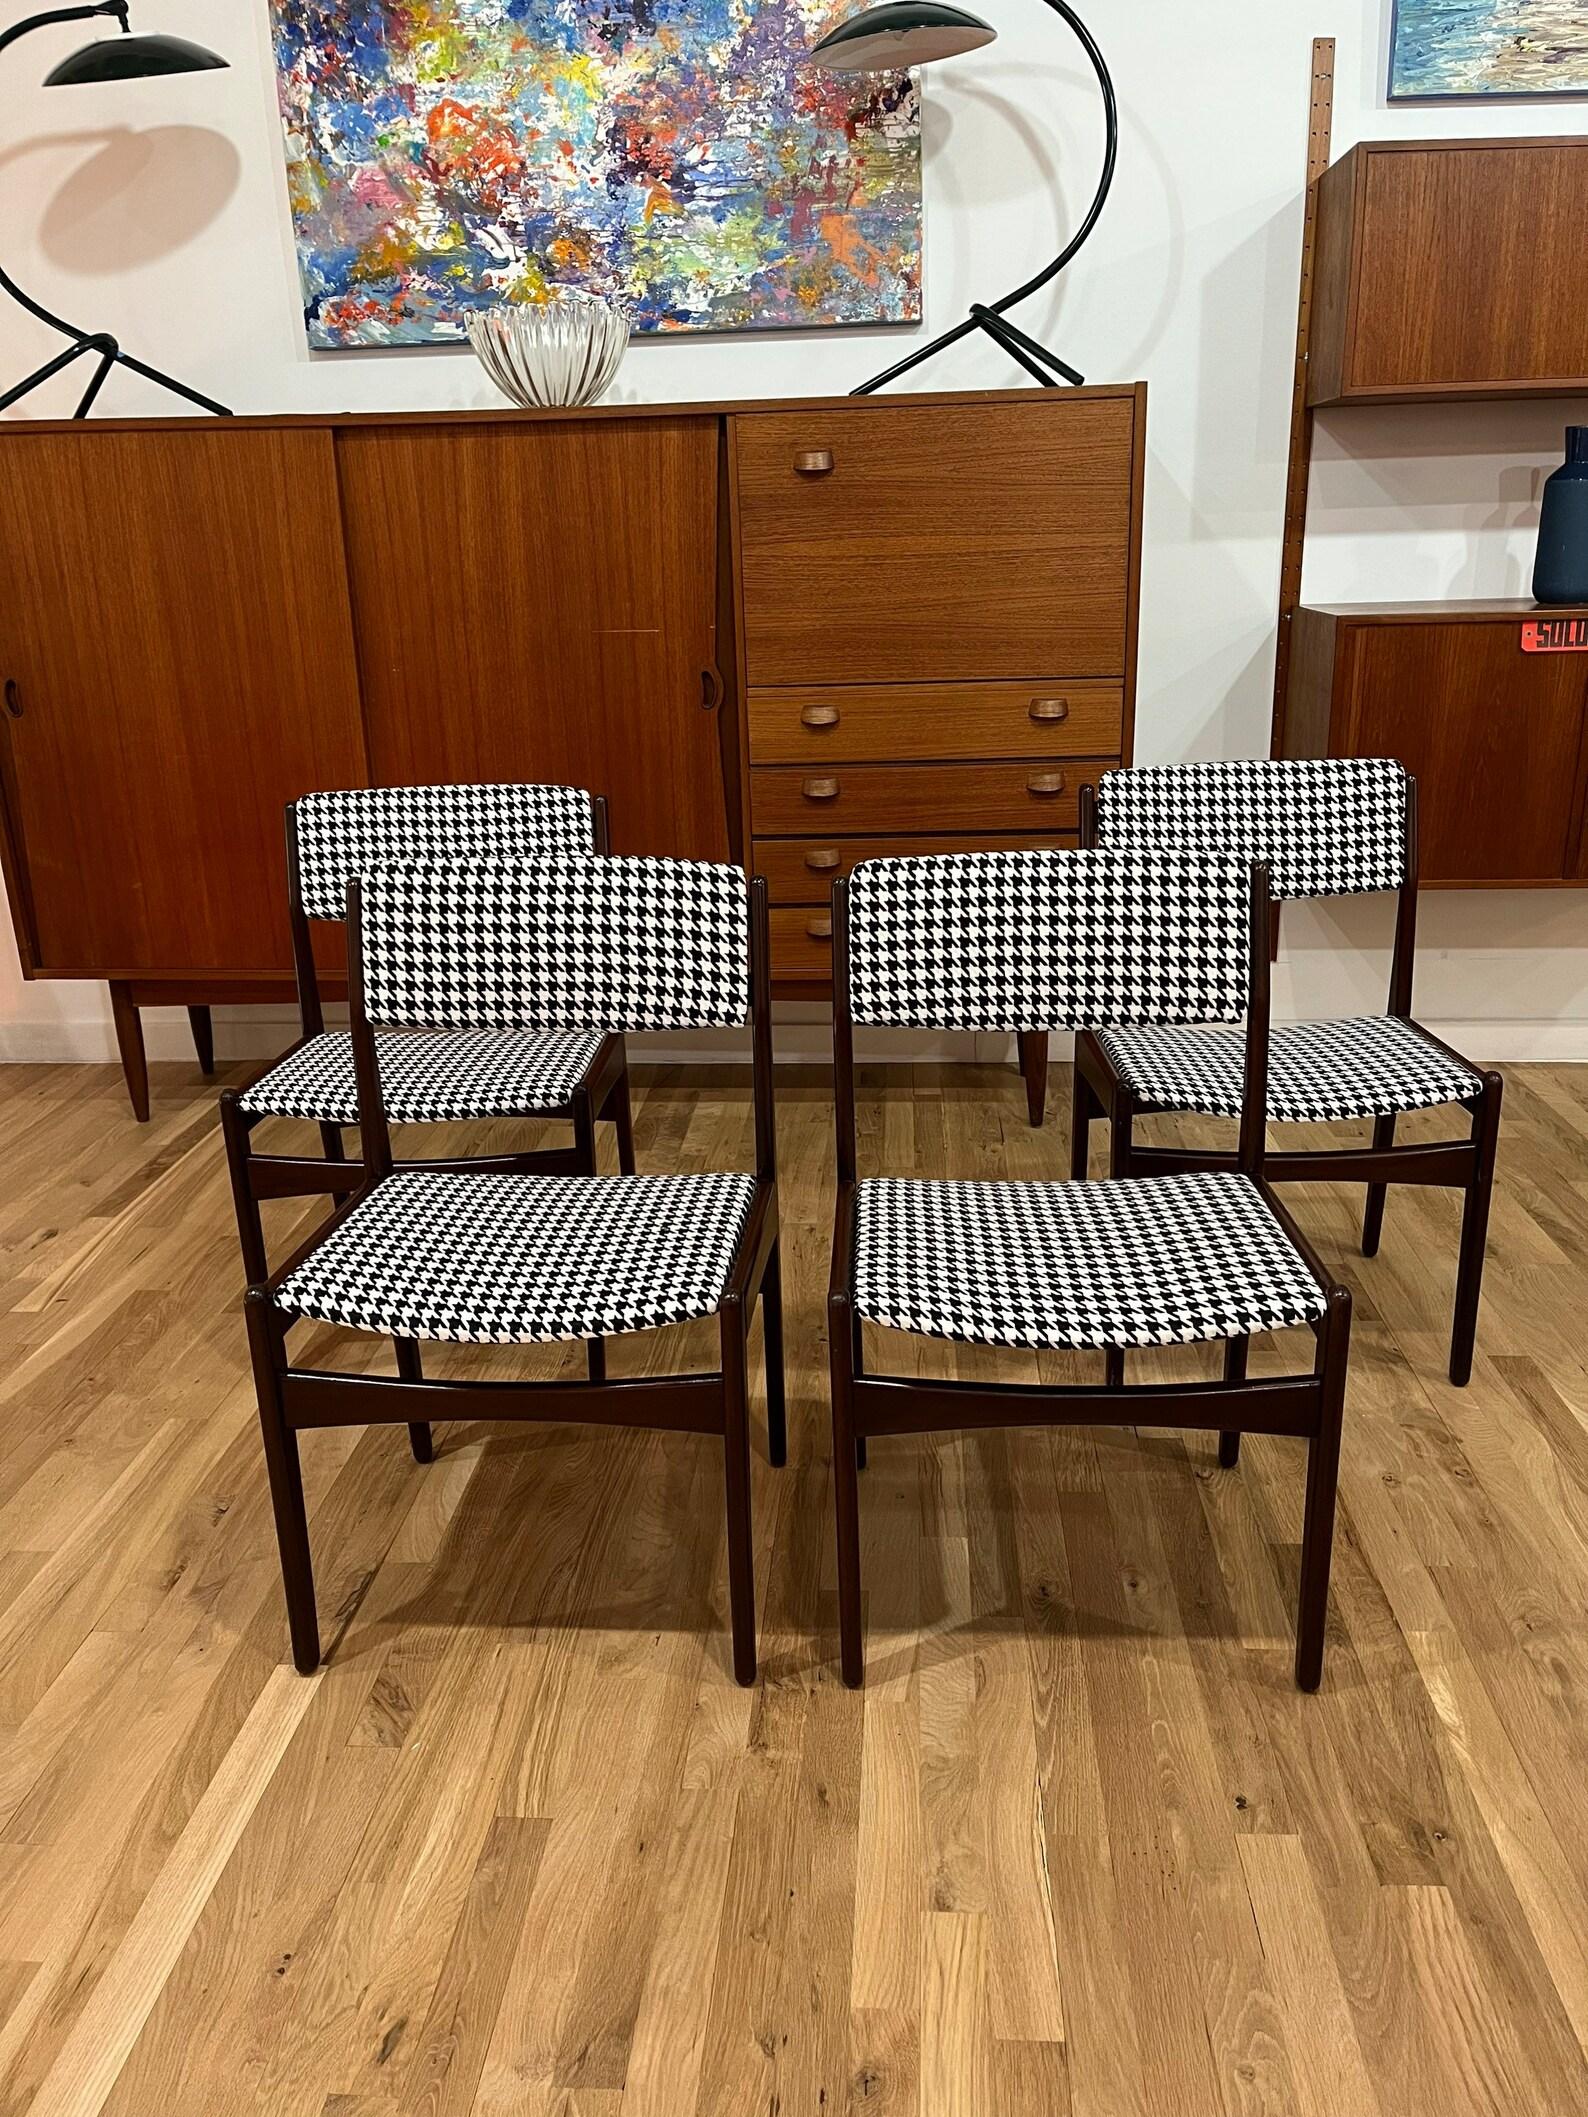 Midcentury curated rosewood dining chairs with new houndstooth upholstry W19.5” x D16 x H31.5” inches 

Seat height: 17” inches.